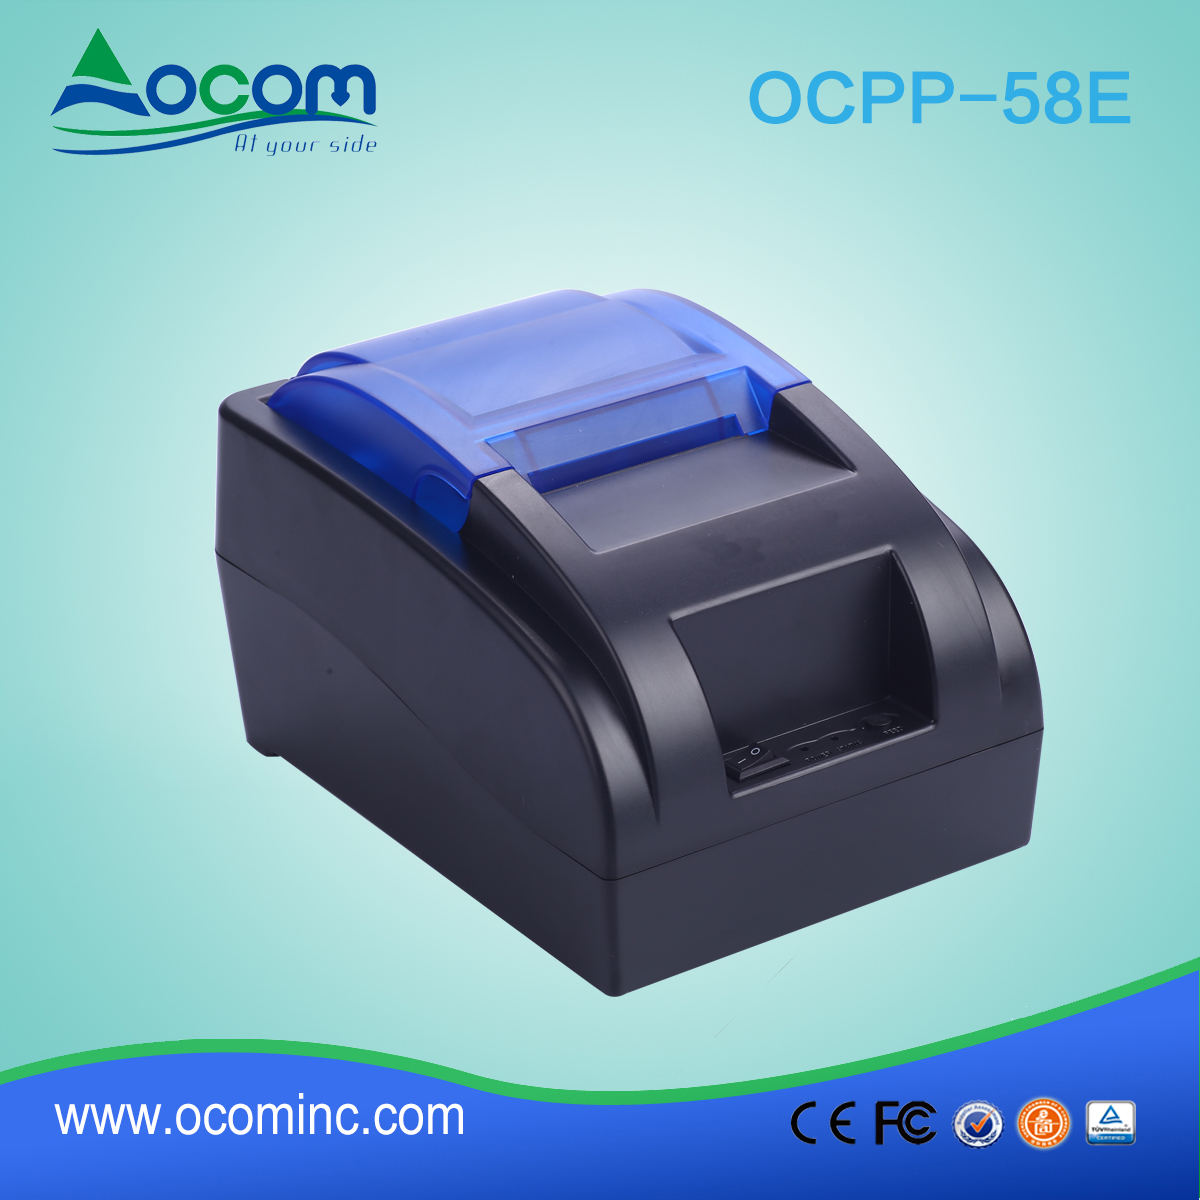 OCPP-58E-China made low cost 58mm thermal printer